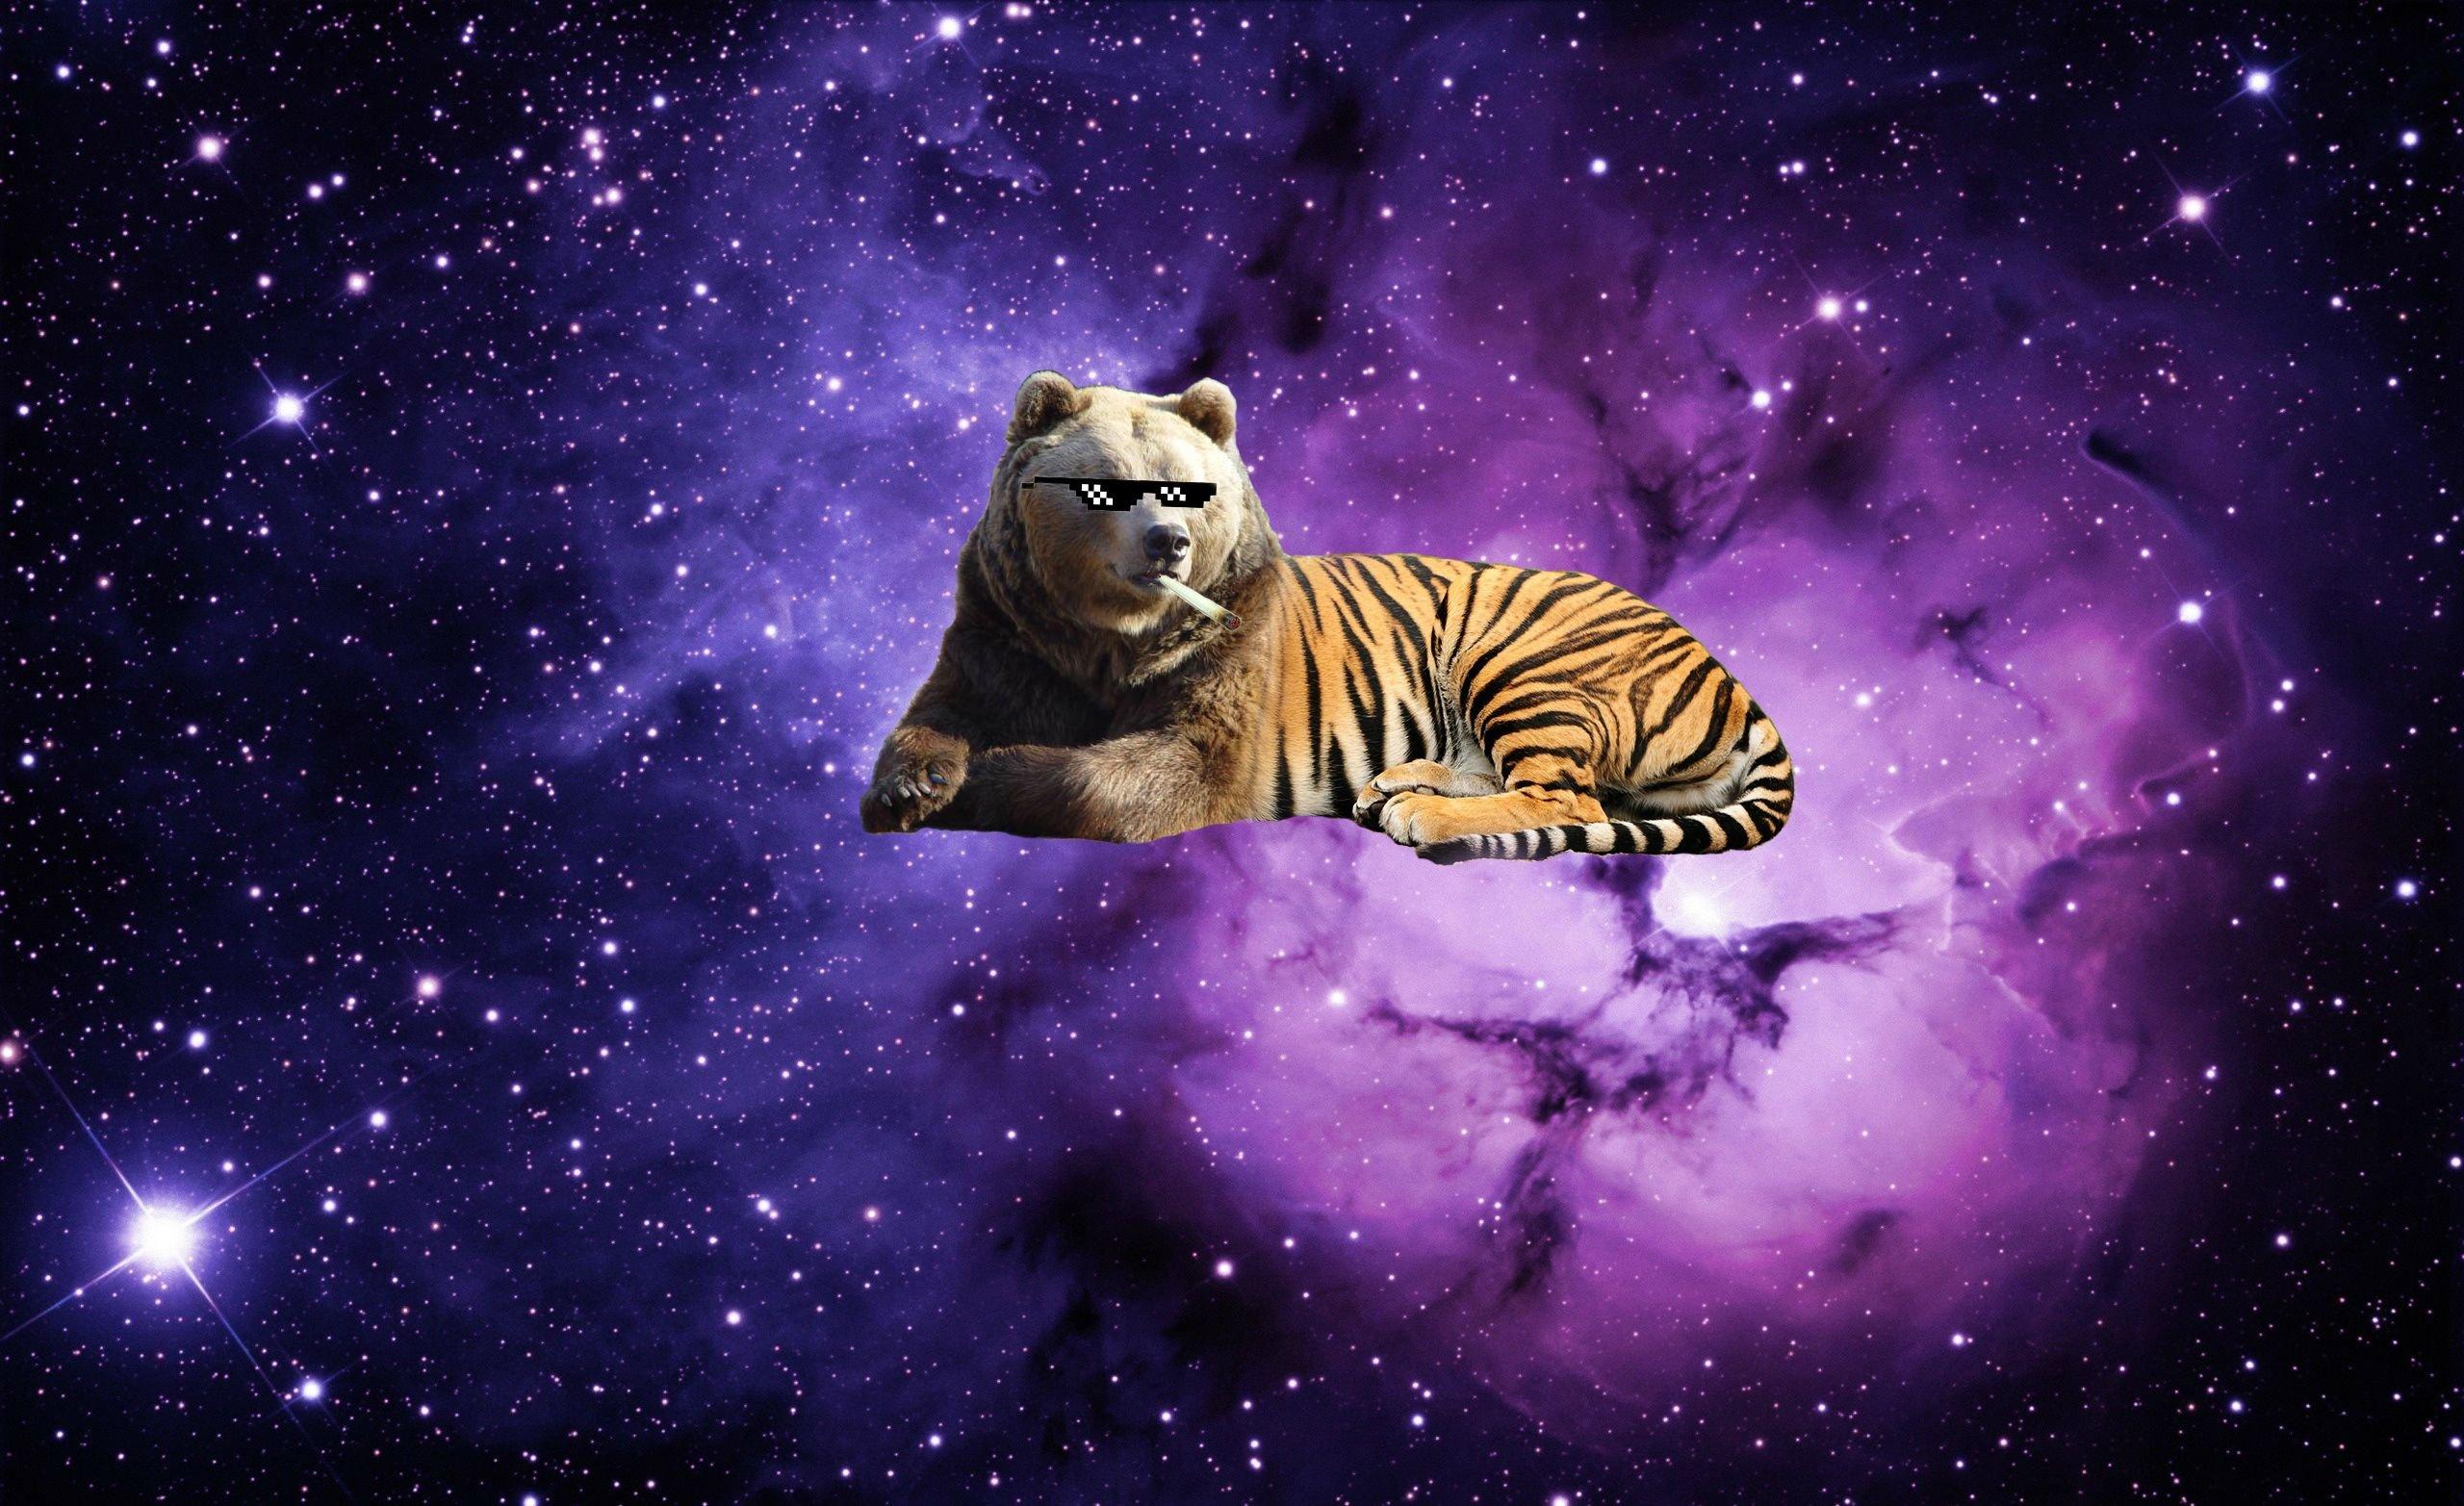 Galaxy Tiger Wallpapers Top Free Galaxy Tiger Backgrounds